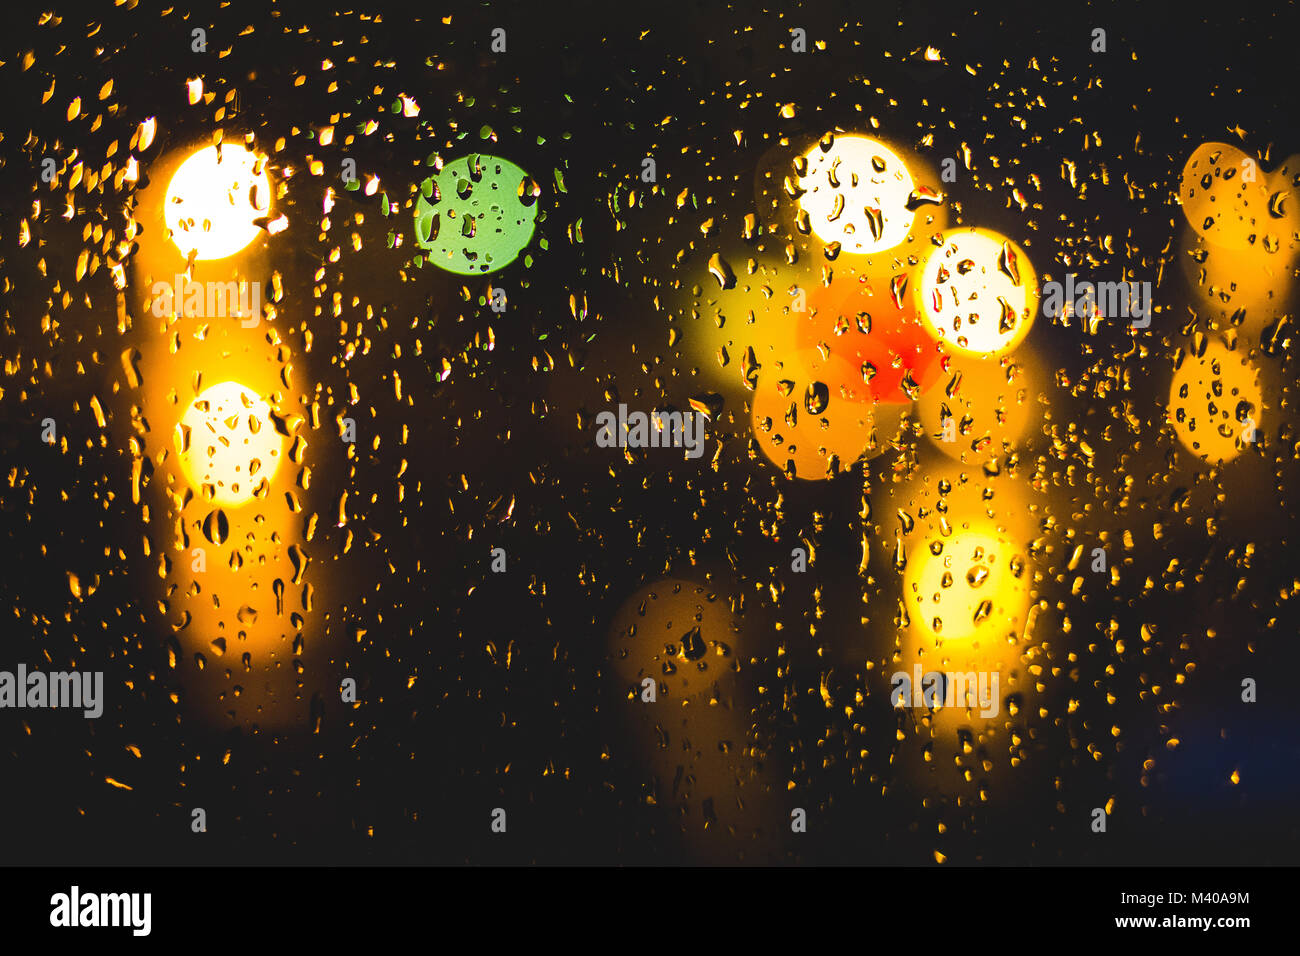 Rain drops on window. Peaceful evening or night at home when raining outside. Water drops on glass. Surface of wet glass. Water splash. City lights bo Stock Photo